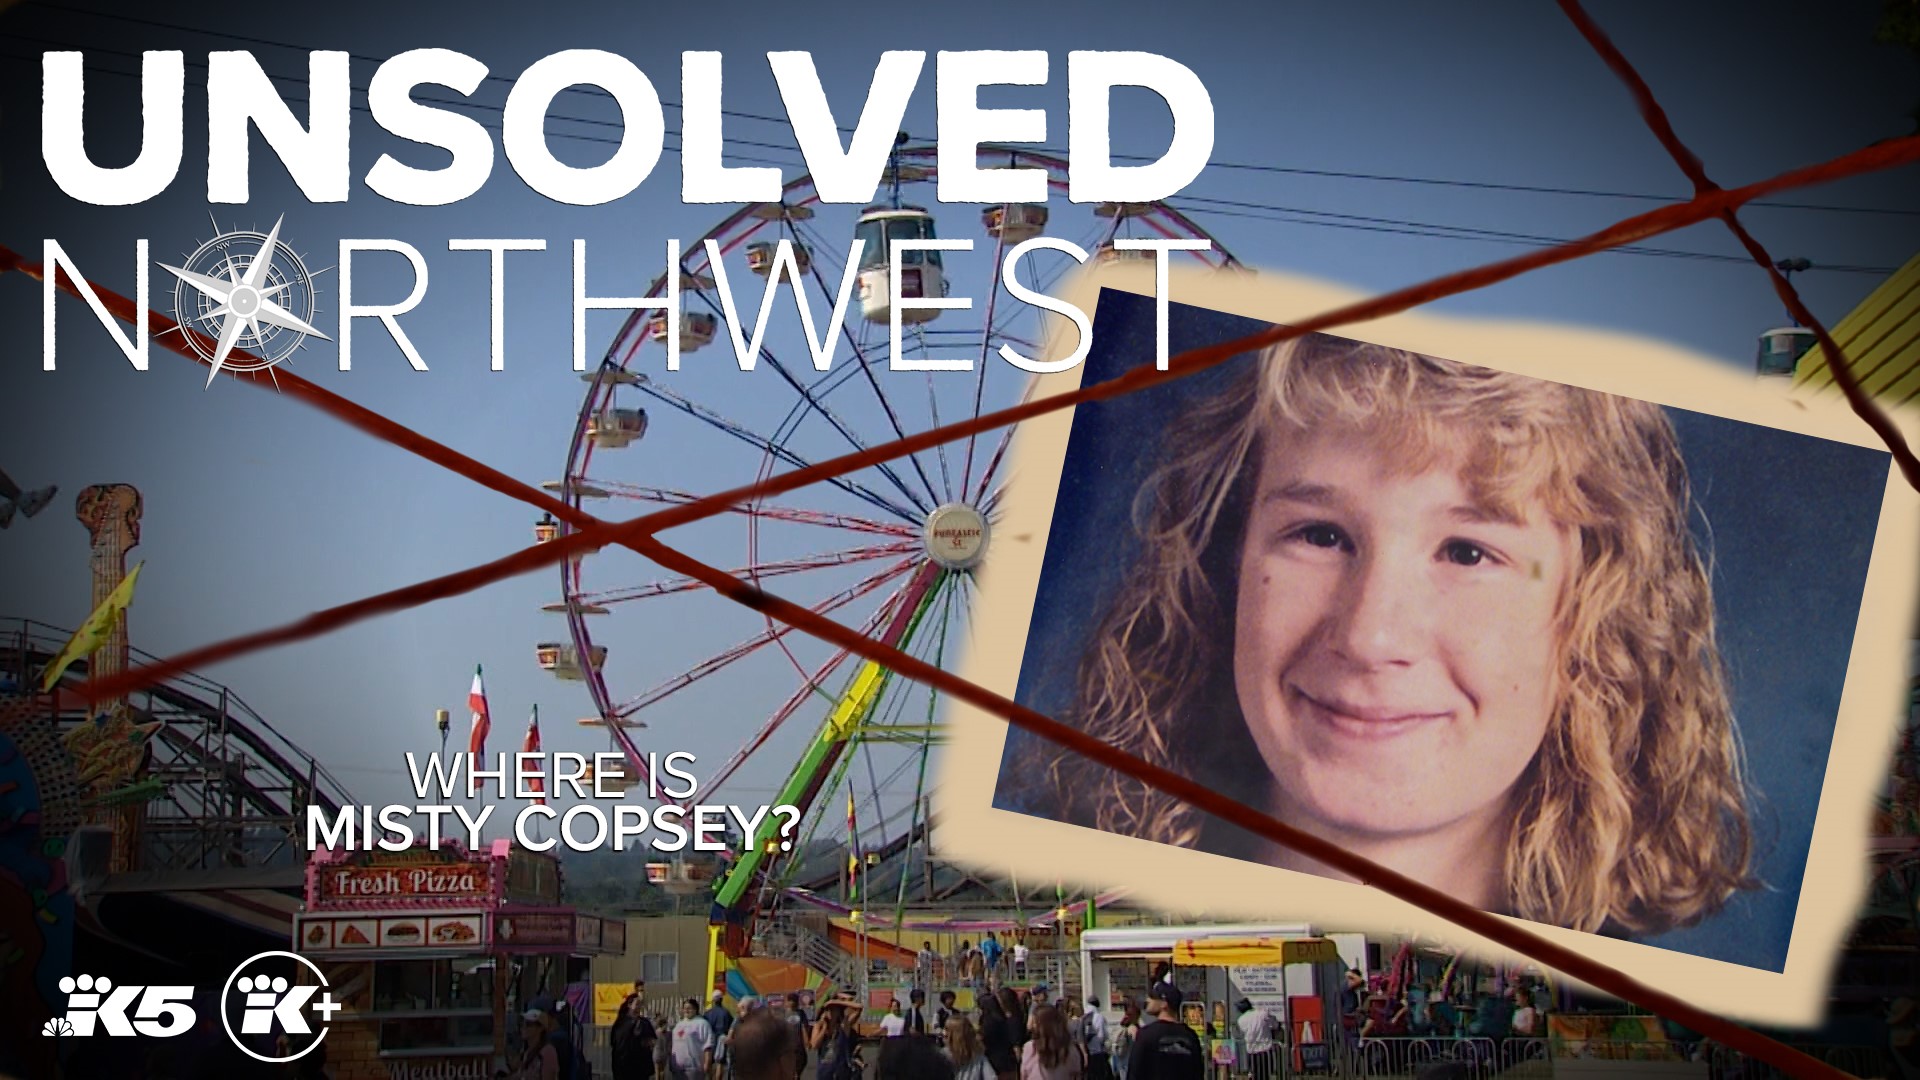 Copsey was last seen by a bus driver when she was trying to get home after a day at the Puyallup Fair, now known as the Washington State Fair, in September of 1992.